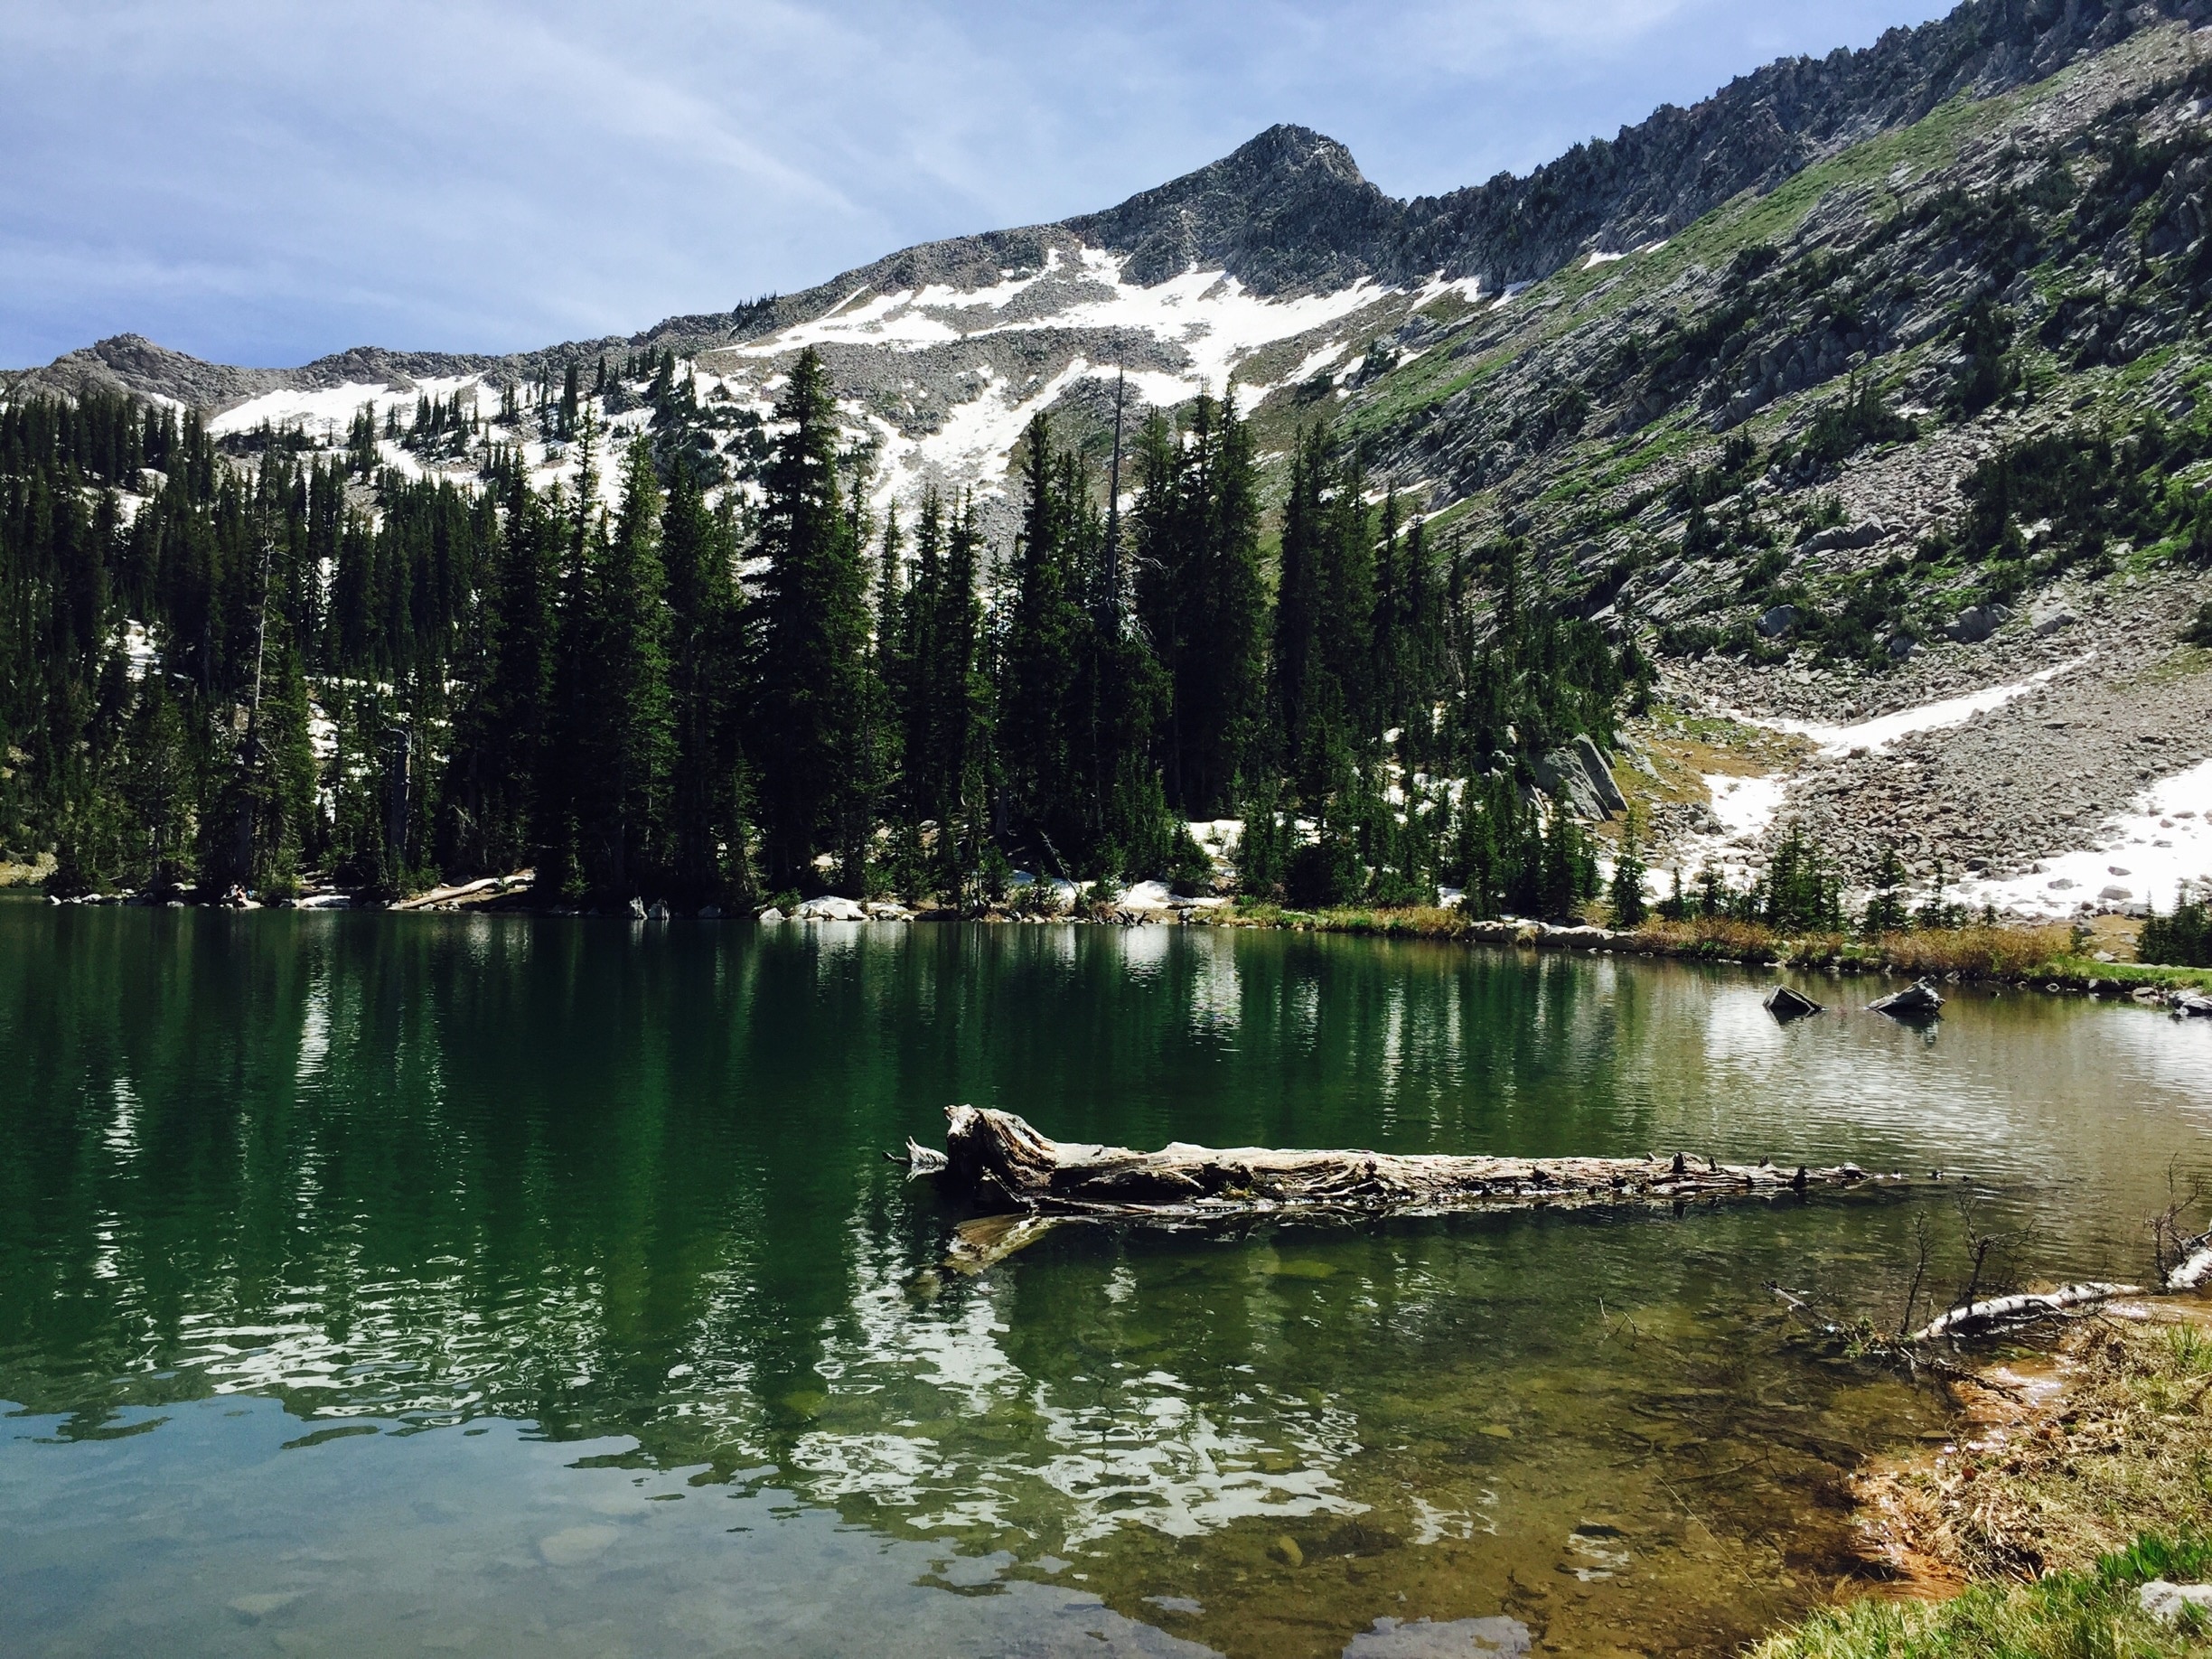 Red pine lake at 10000 feet in Wasatch national forest near Salt Lake City. Check out the glaciers on the mountain in the background. 